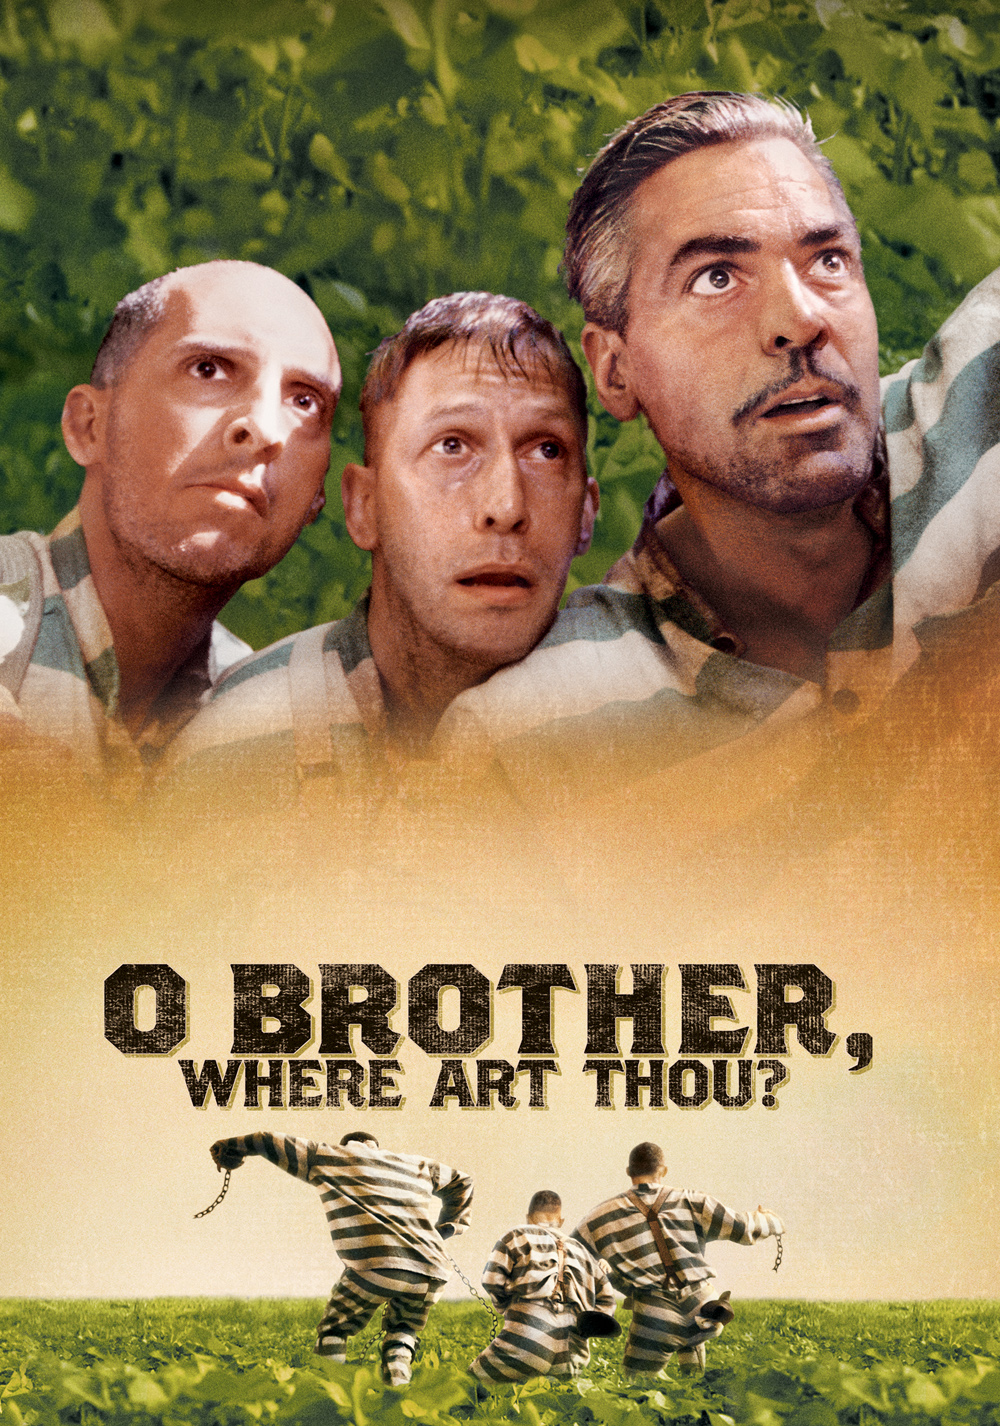 O Brother, Where Art Thou? Picture